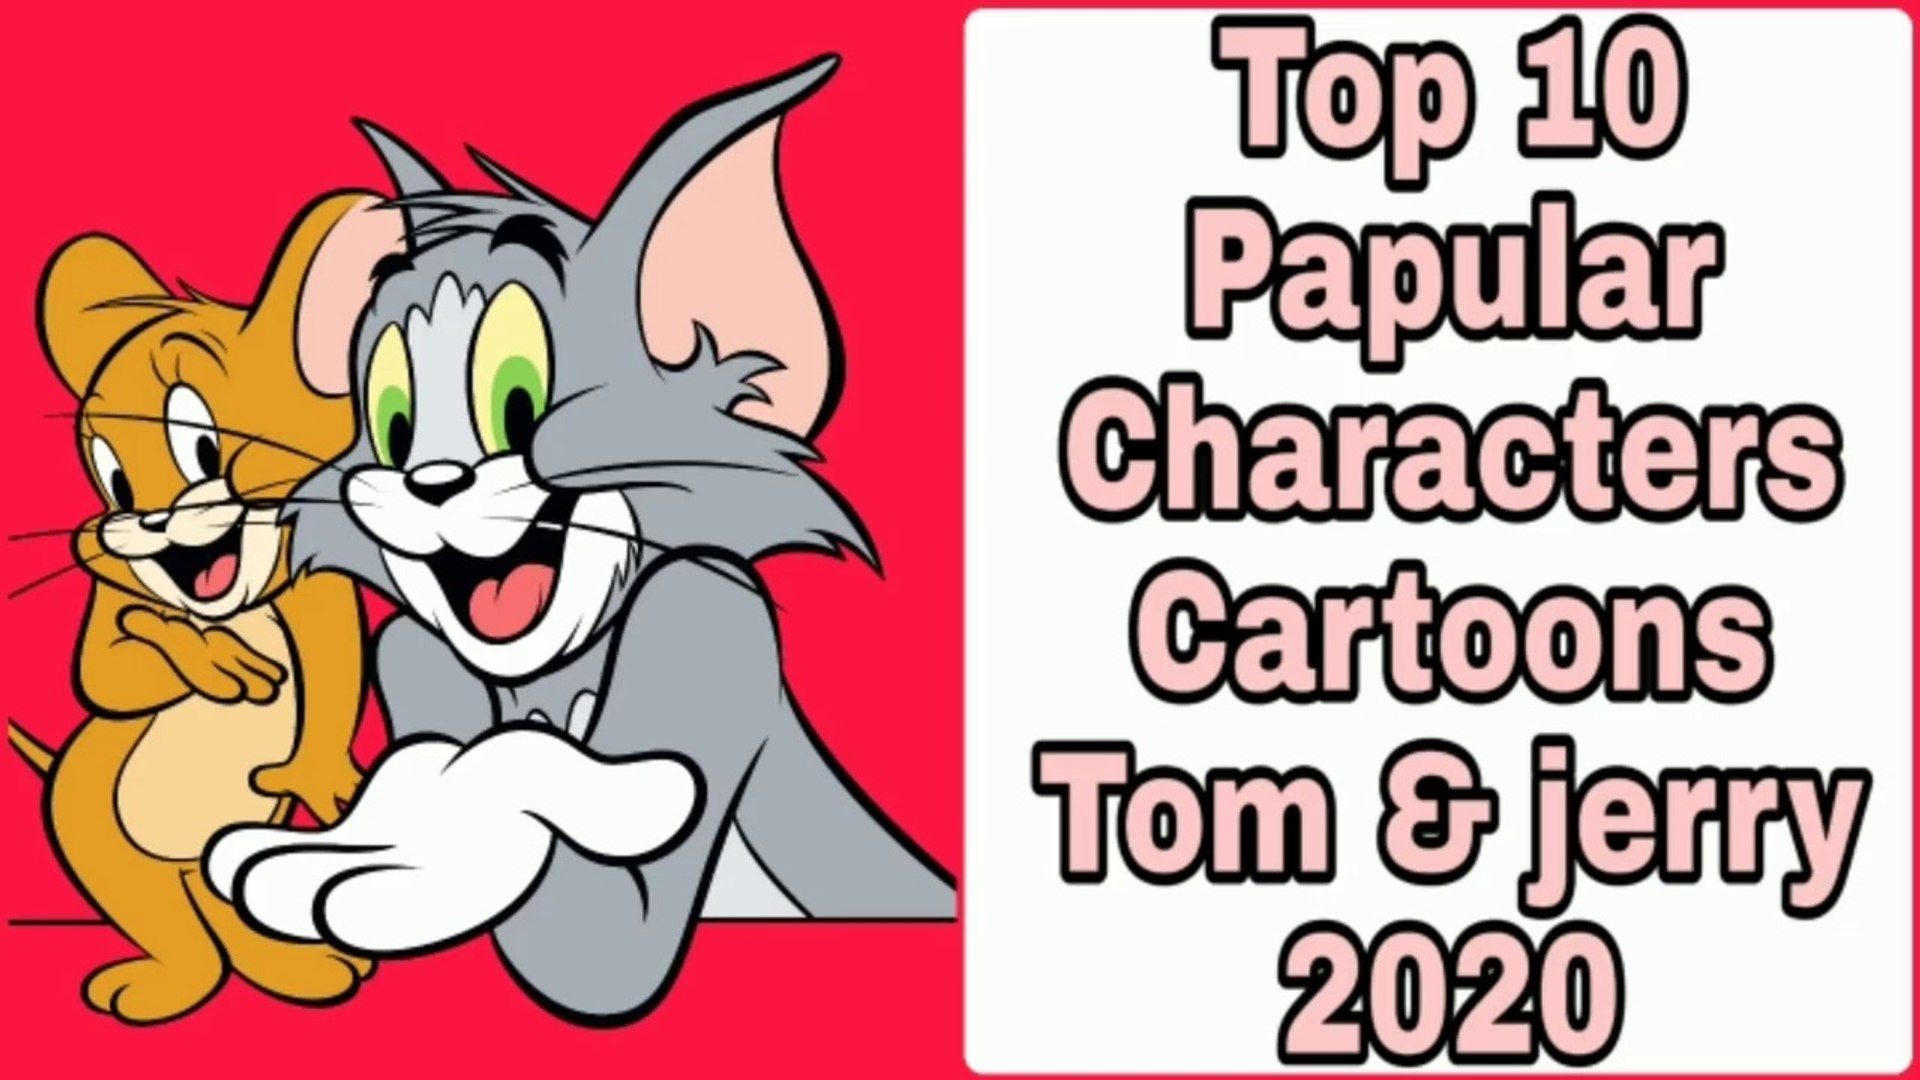 Top 10 Papular Characters Cartoons Tom & jerry 2020 - video Dailymotion